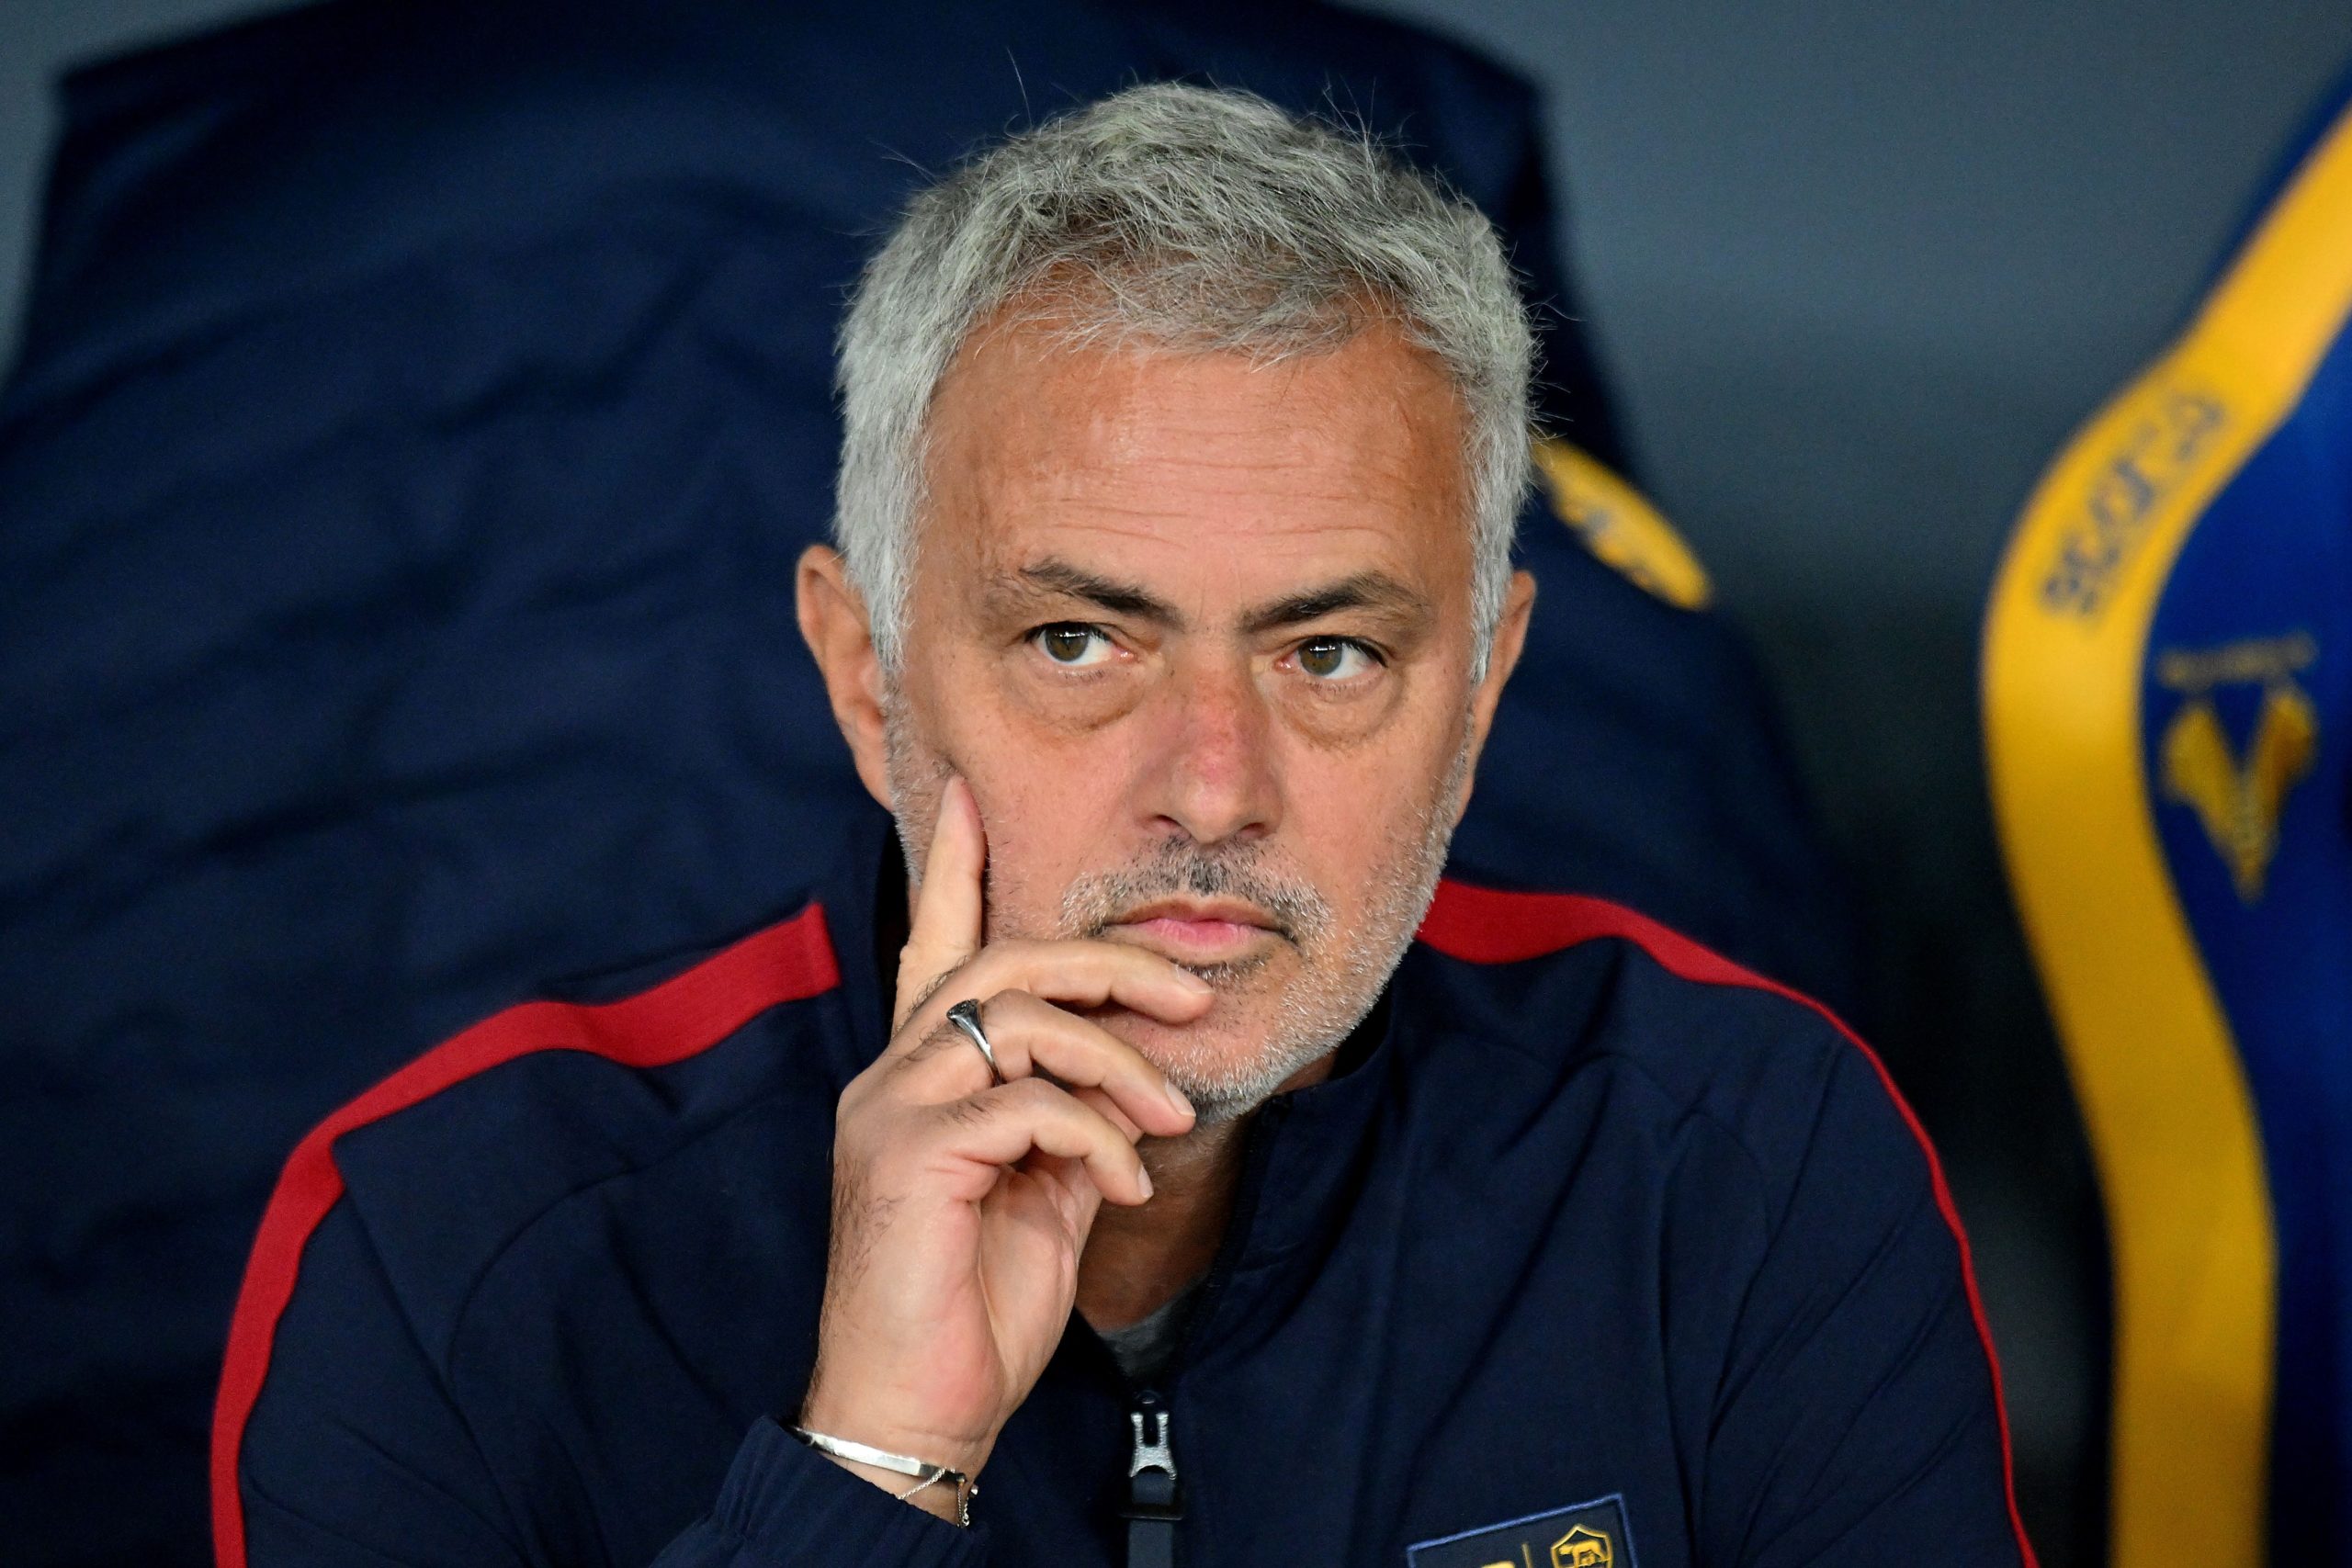 Portugal tried to convince José Mourinho, but they will probably come up empty-handed. The Special One is leaning toward refusing the proposal.